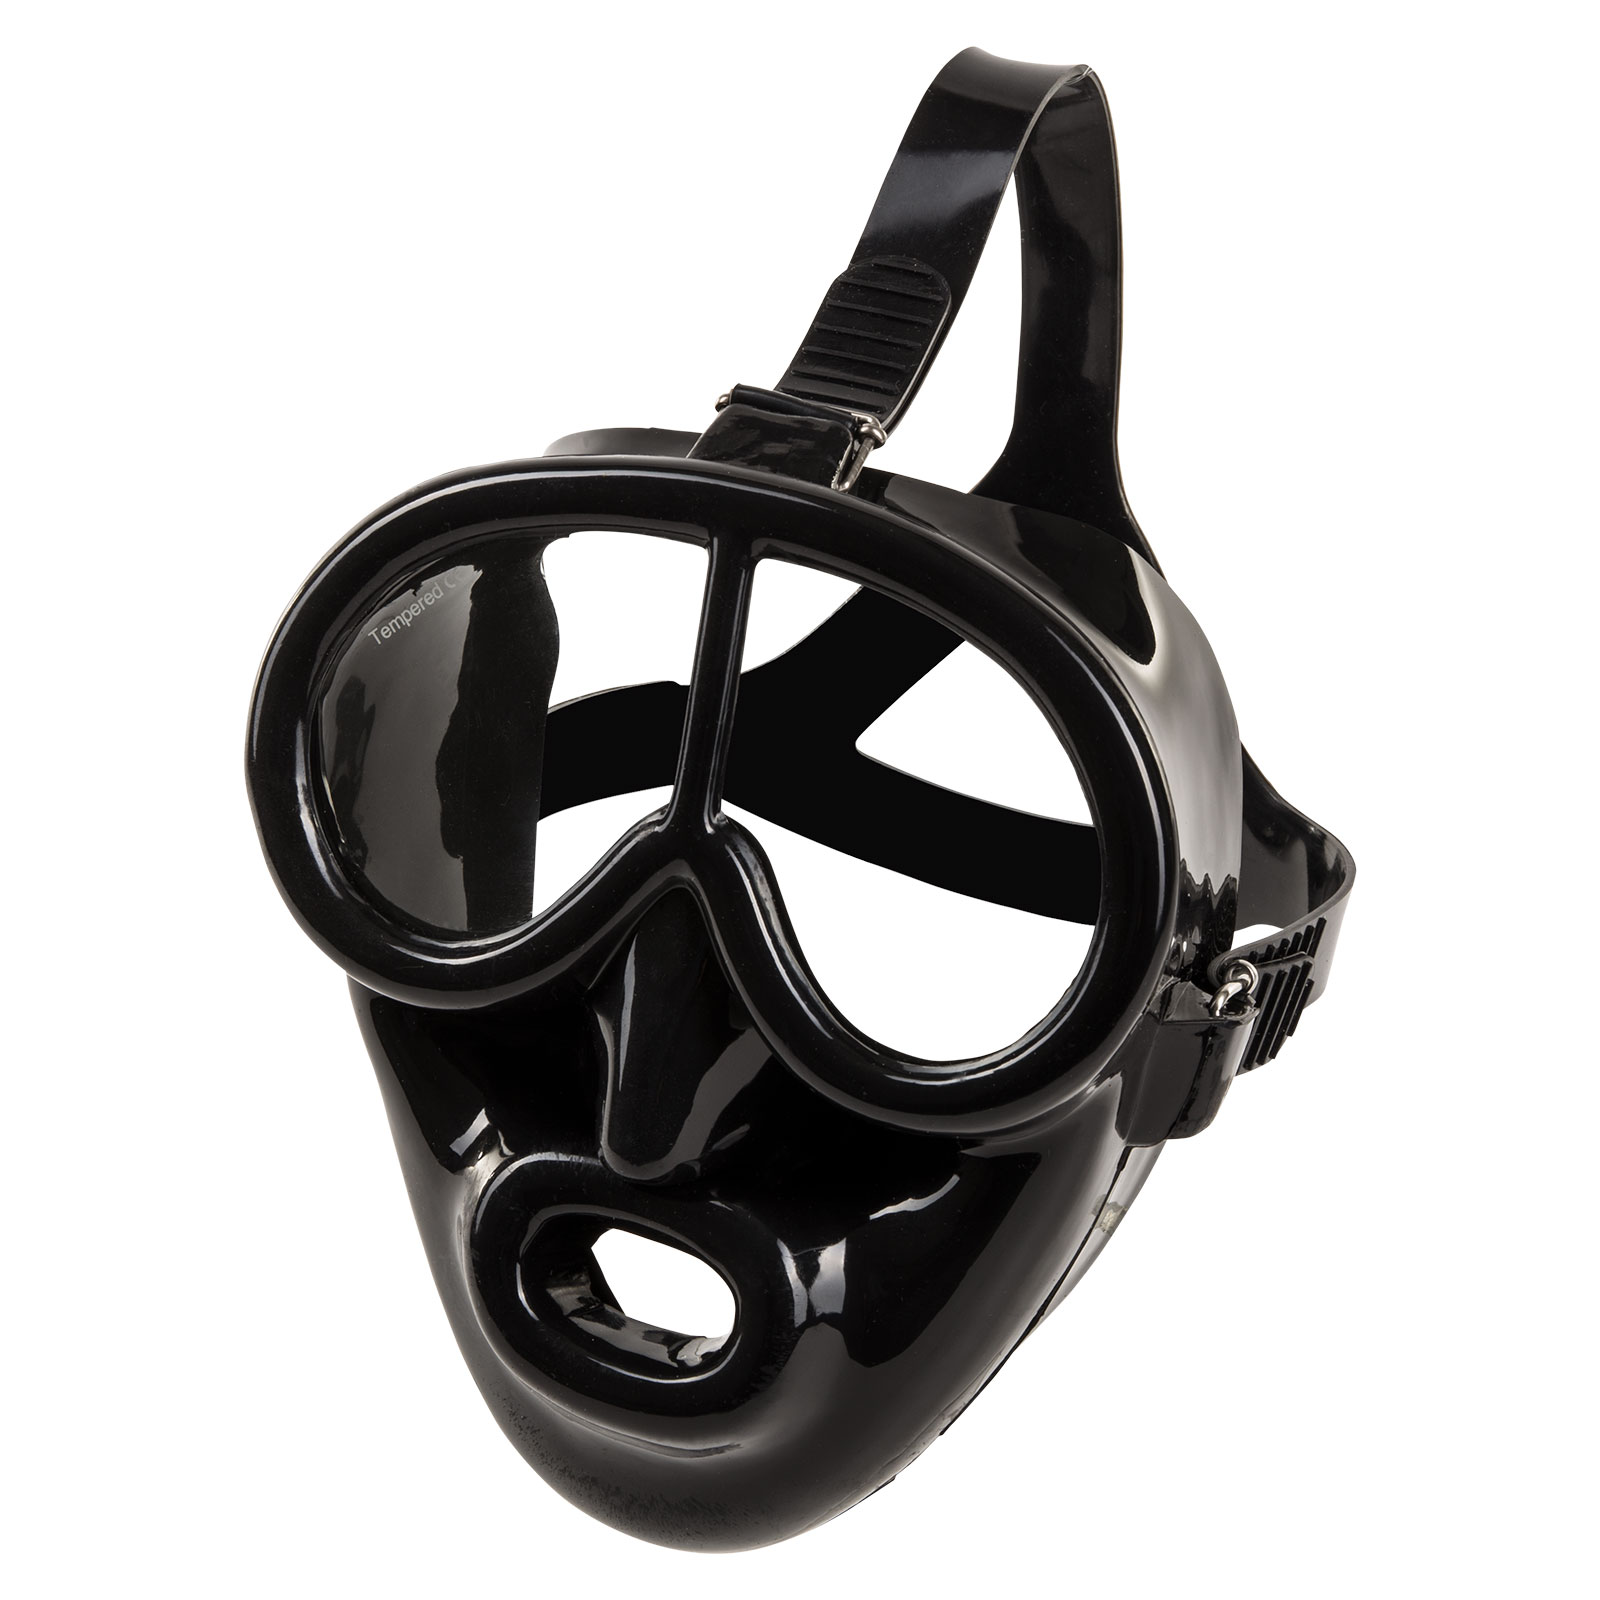 Introduces the SHEMA97 Functional Active Mask 